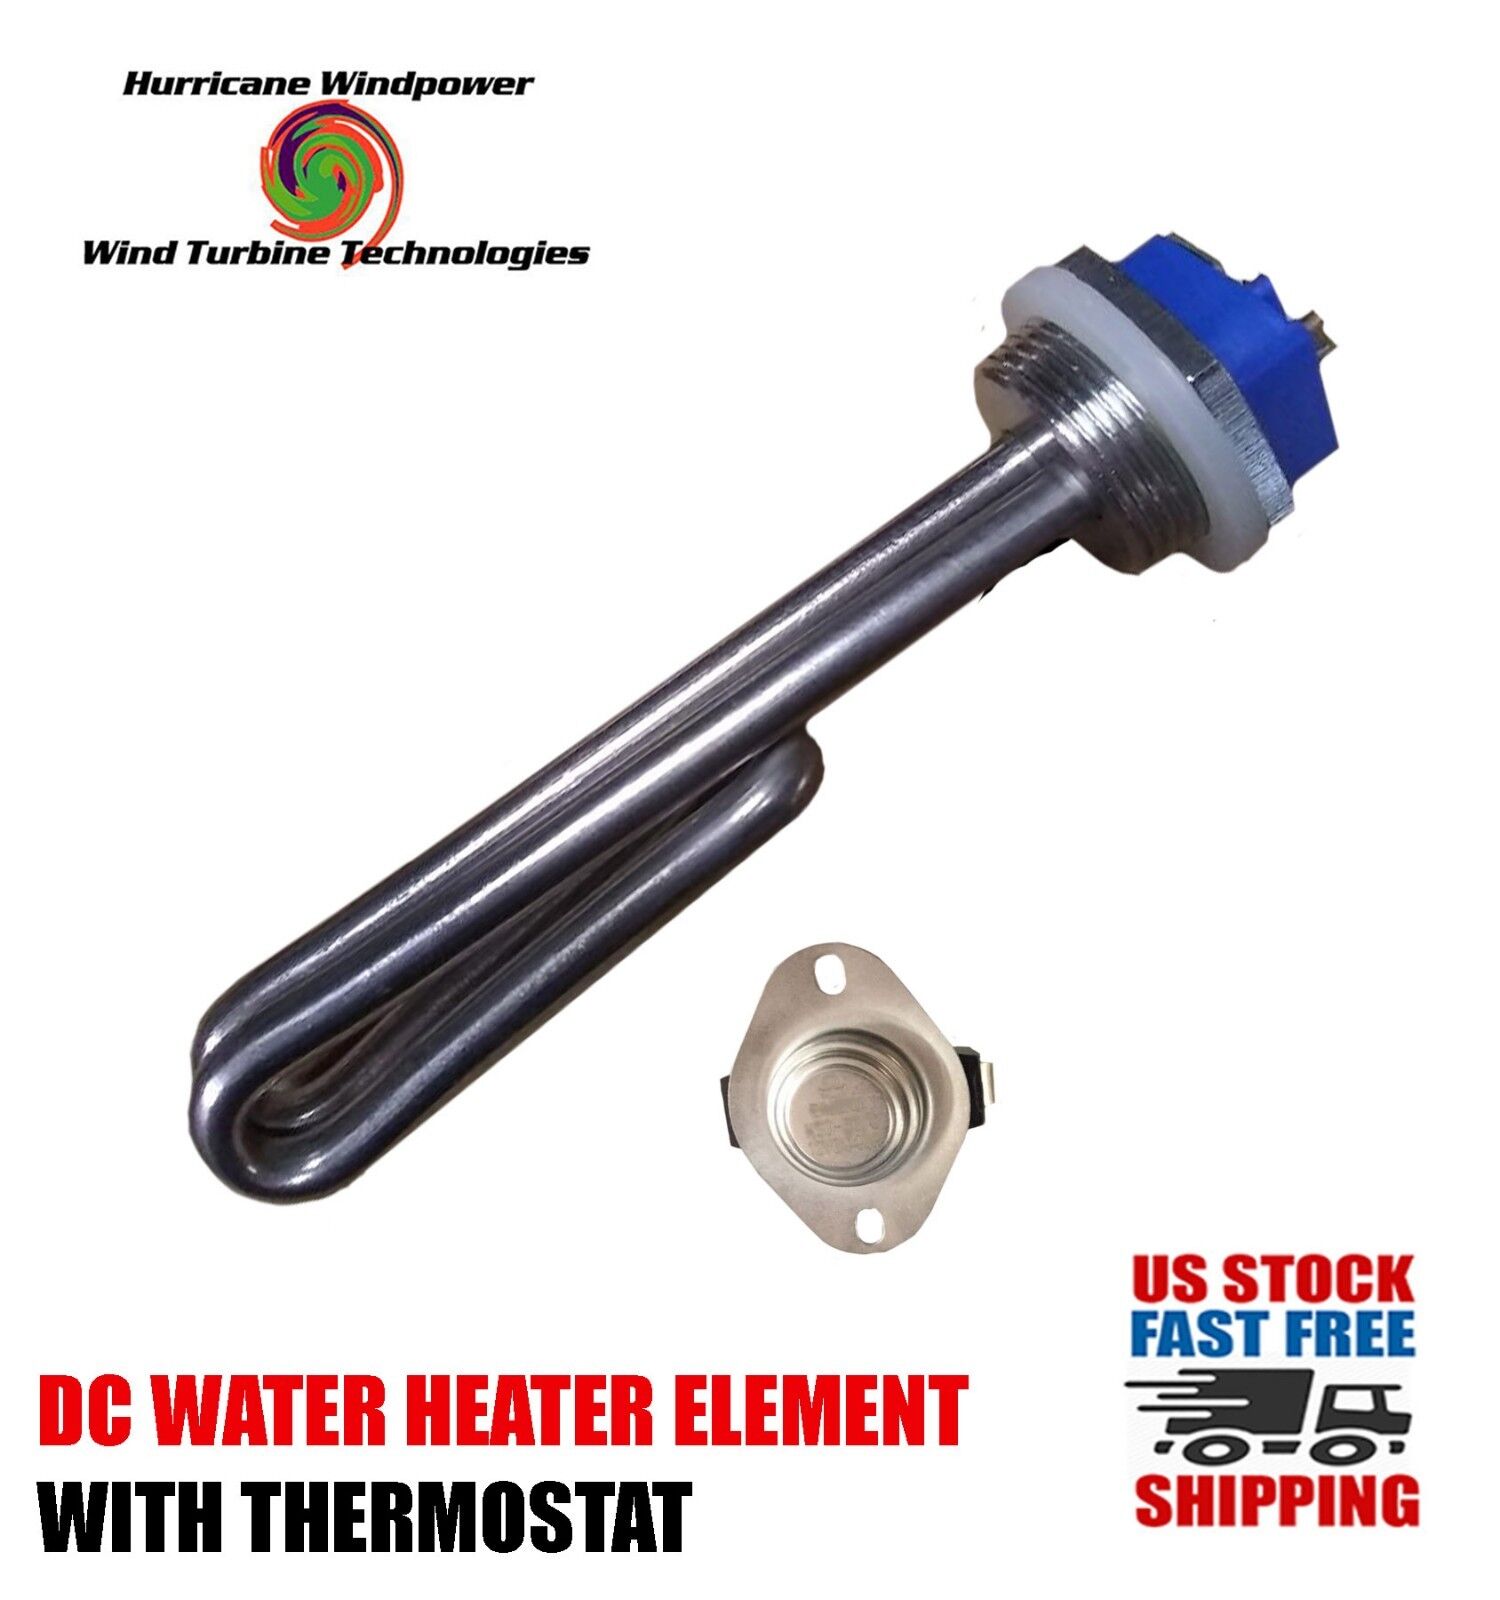 DC Water Heater Element 12 Volt 65 Watt with Thermostat 140 Degrees F